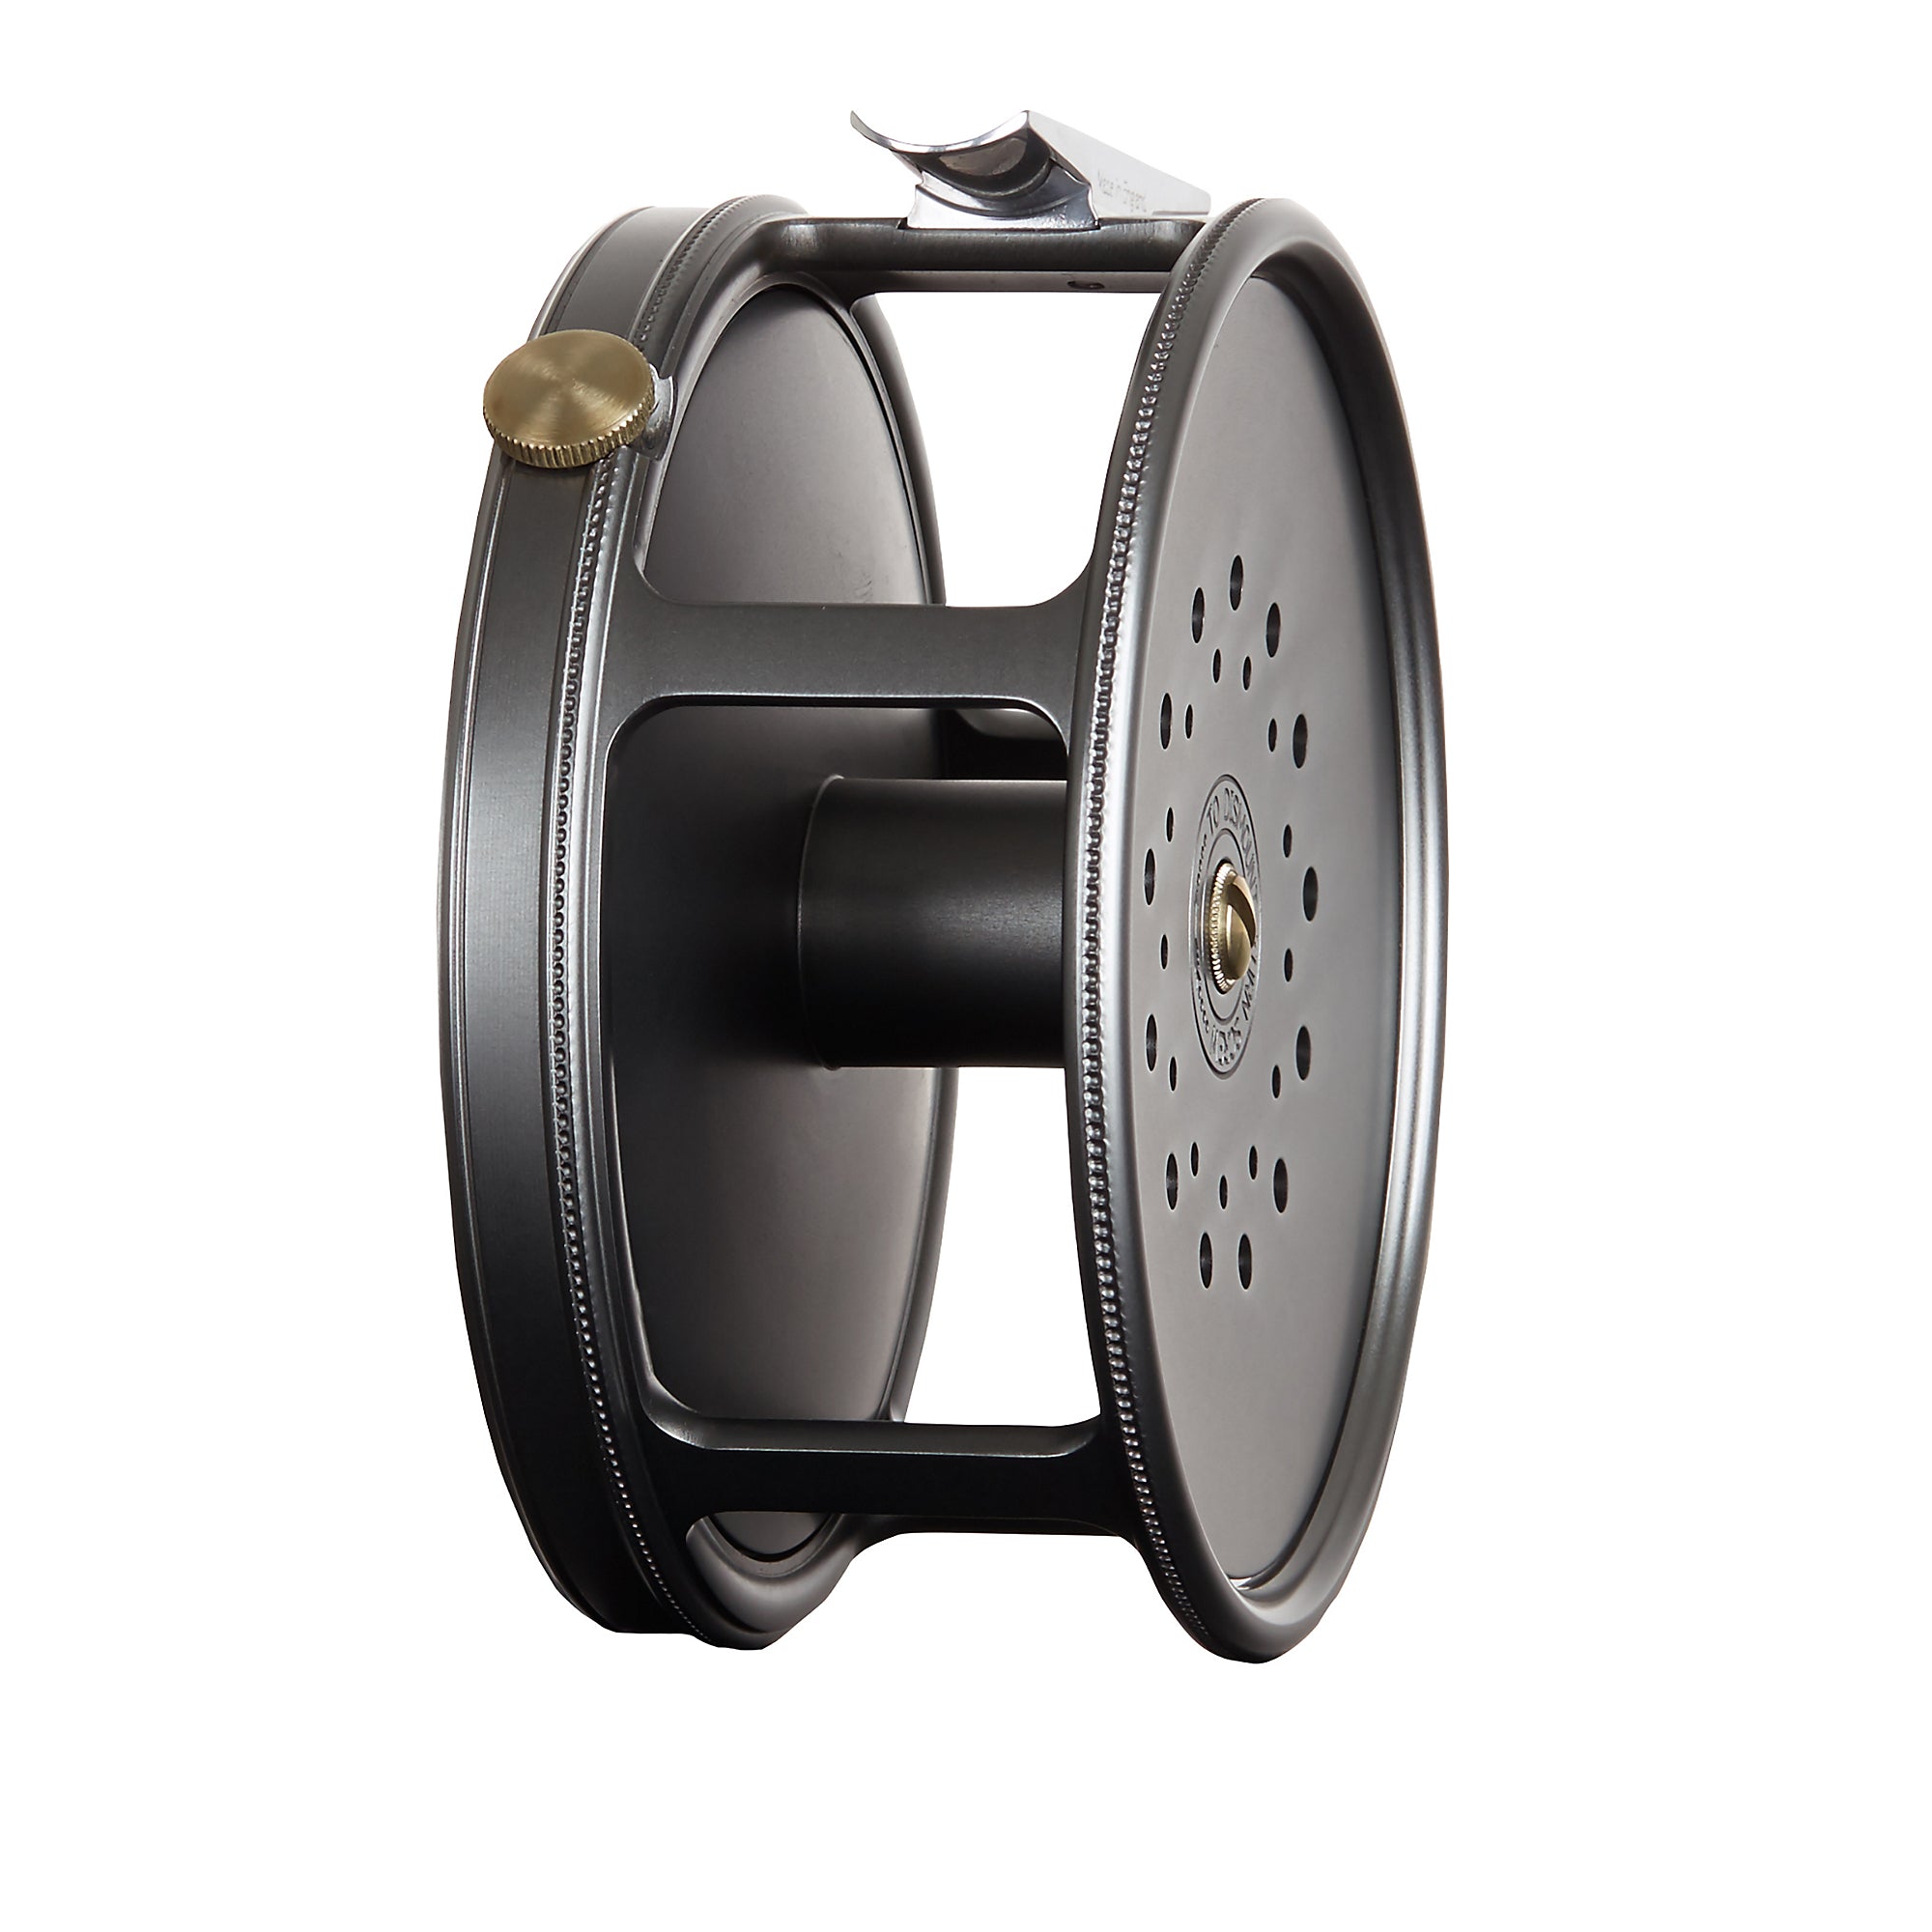 HARDY WIDESPOOL PERFECT FLY REEL